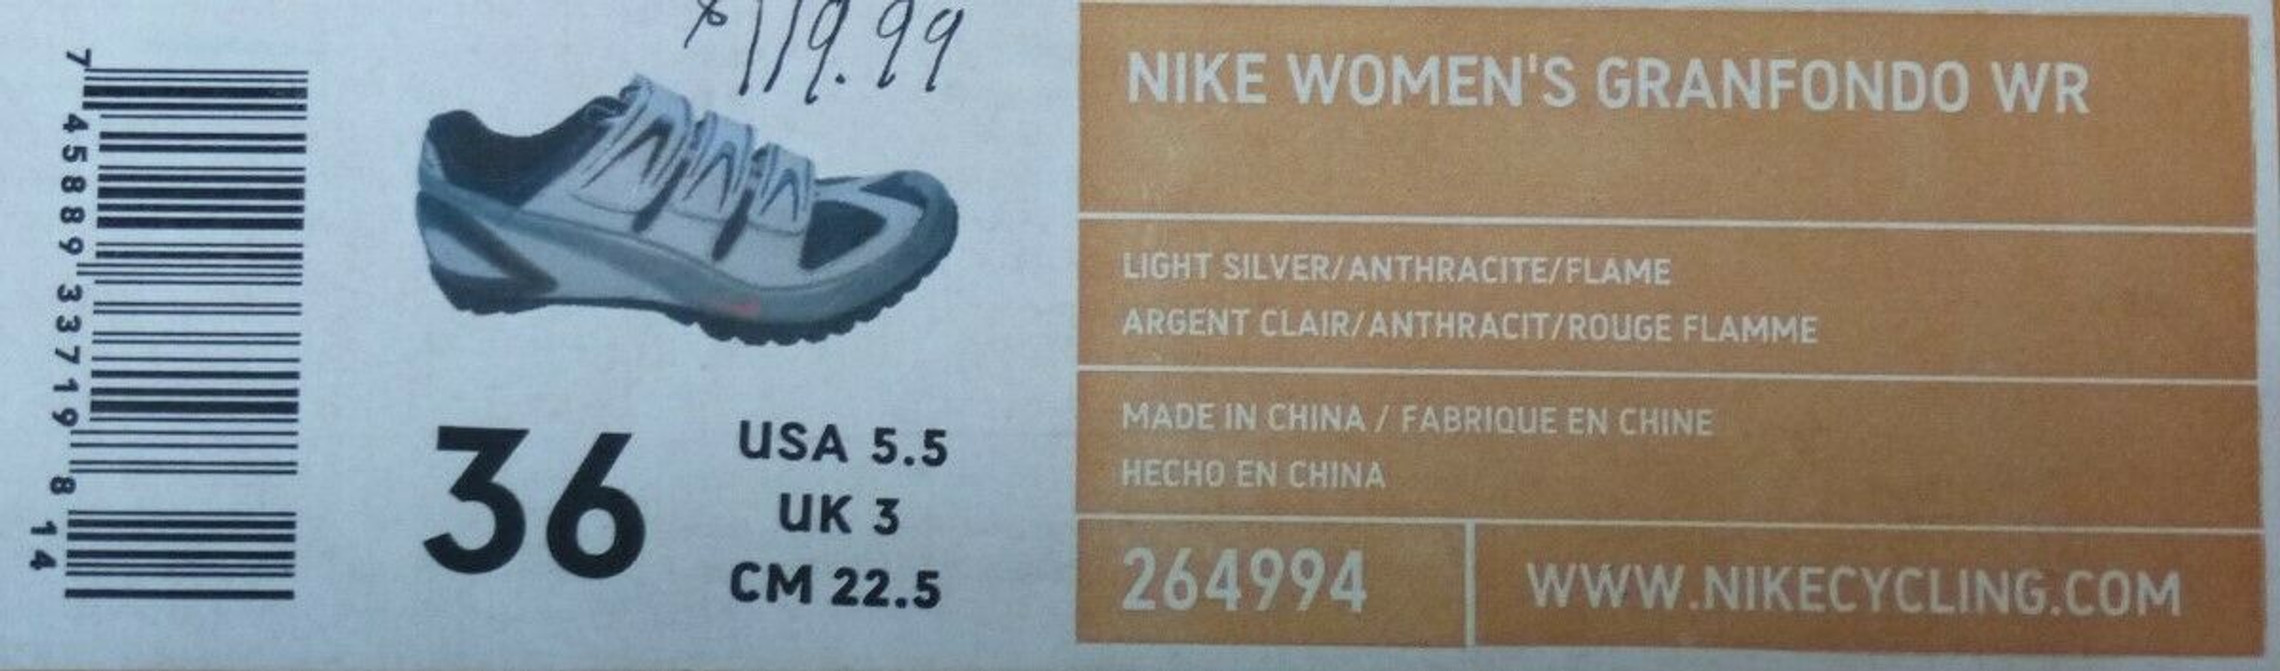 Nike Granfondo WR Women's Road Cycling / Spin Shoes: Size 37 - Two Bolt Cleats - Walkable - Grey/Black (NEW)